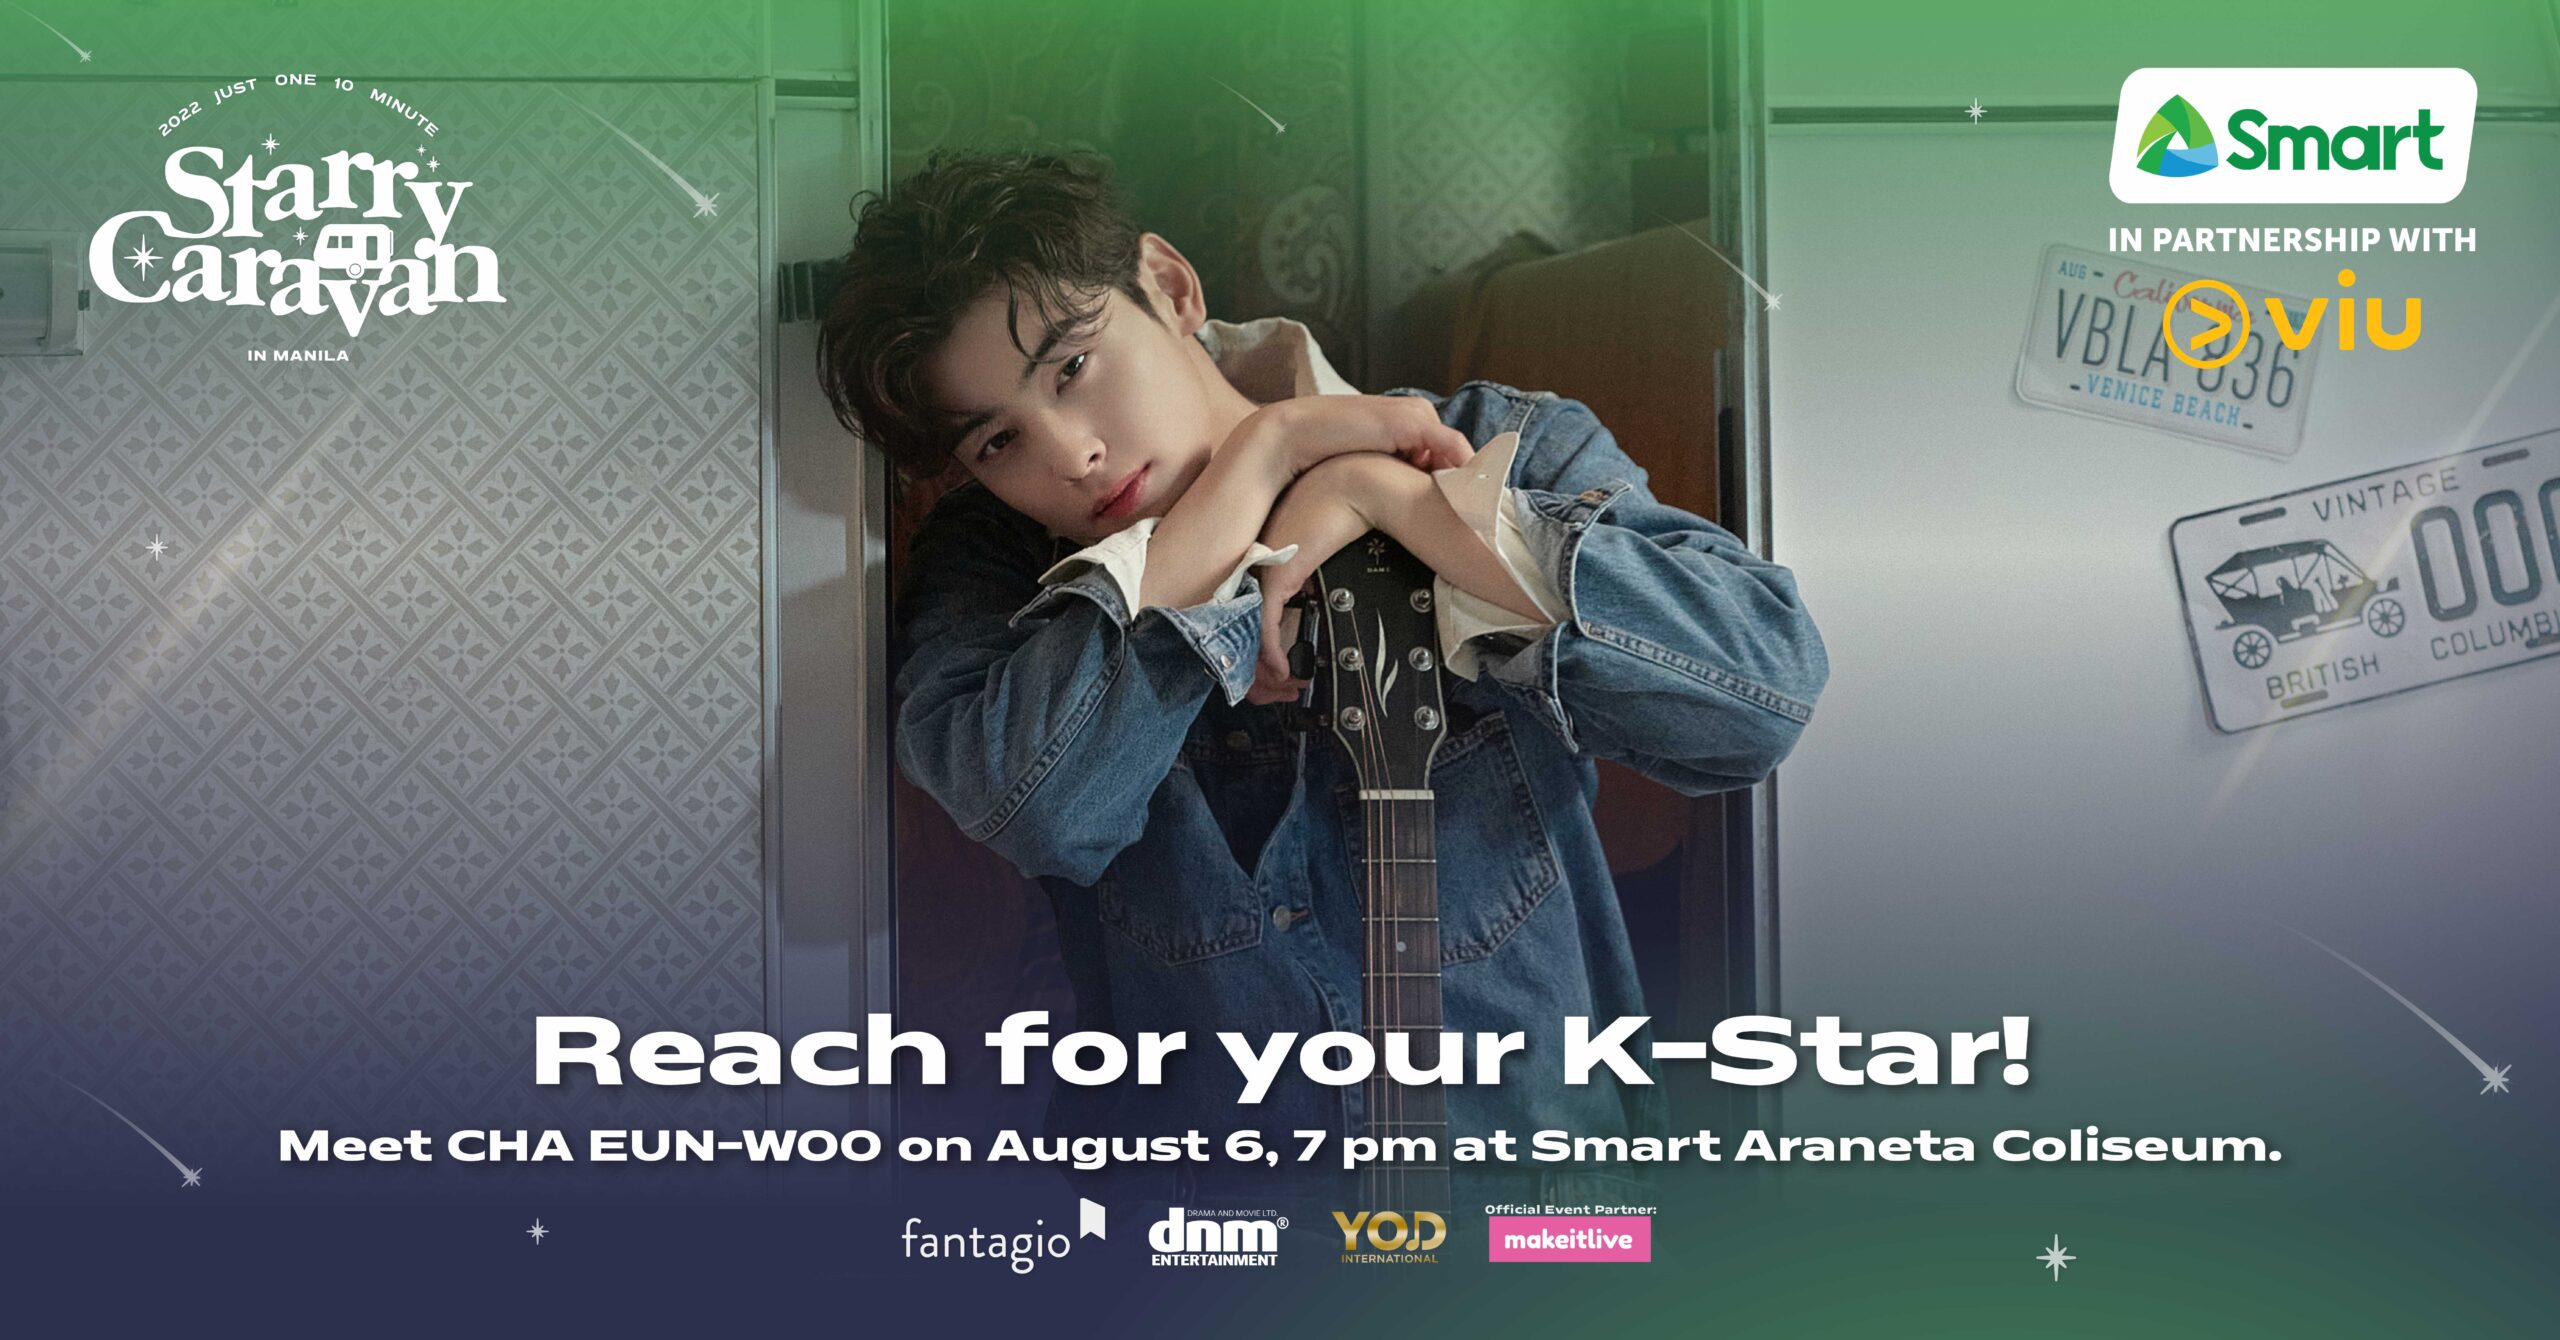 Leading telco offers fans the chance to meet and greet Cha Eun-Woo